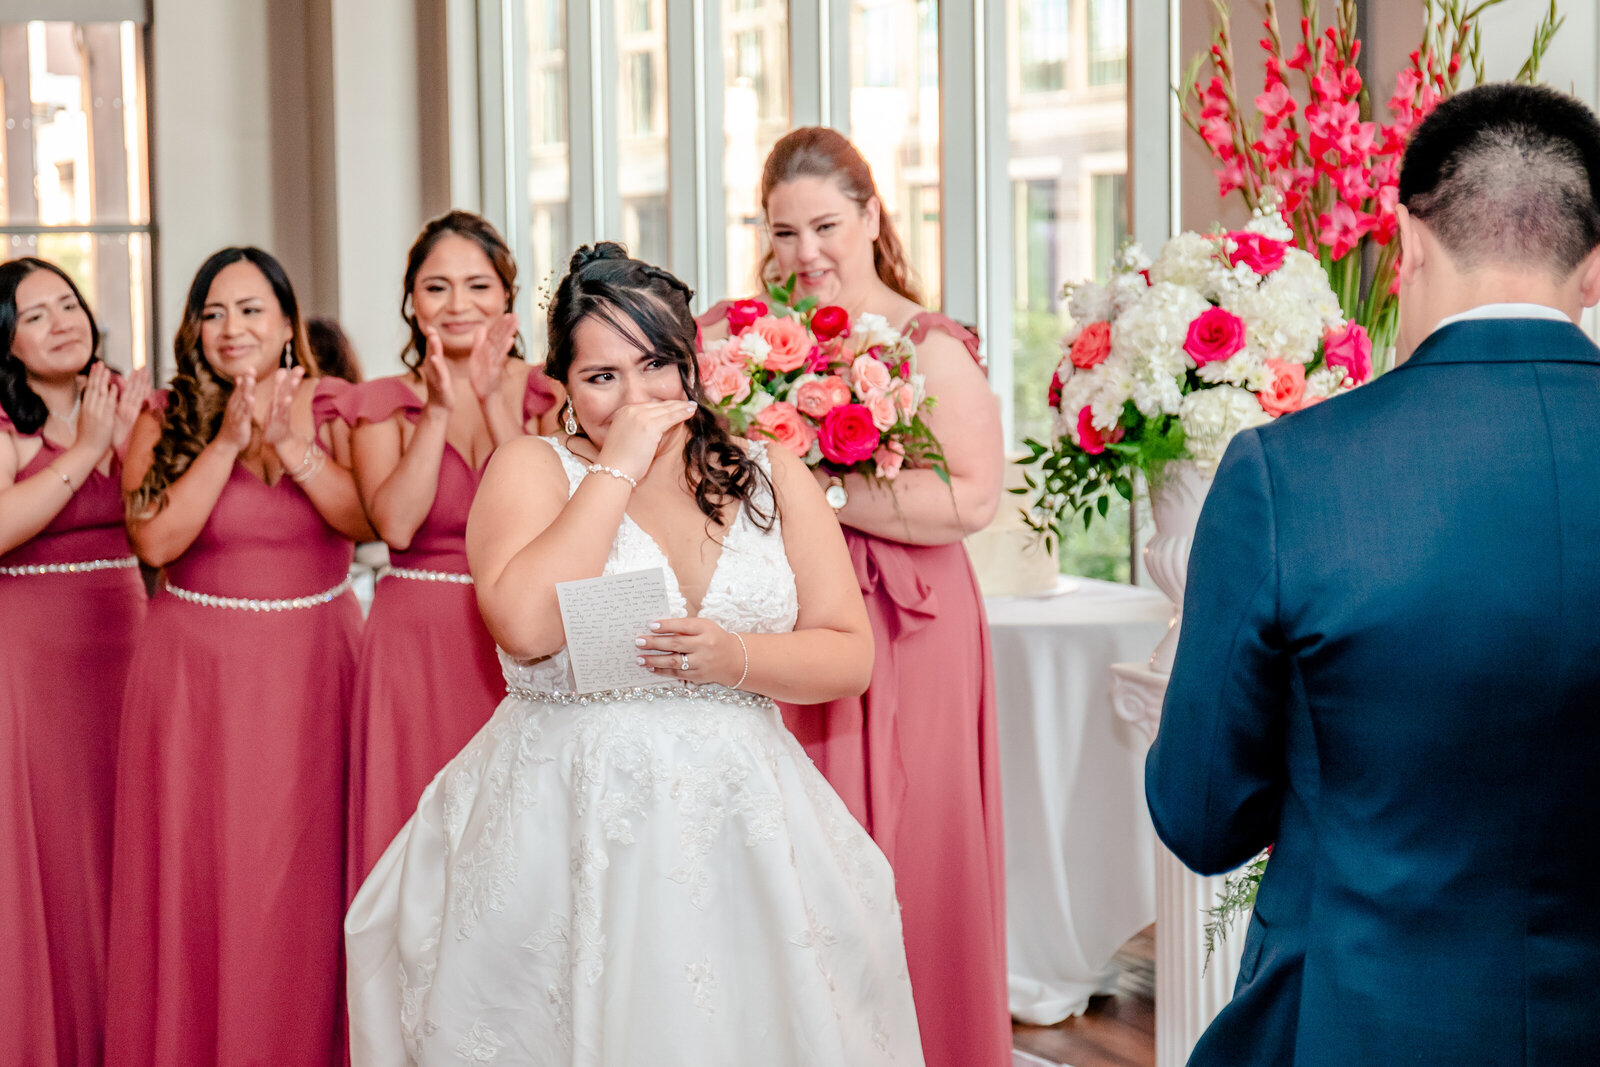 A bride getting emotional during the exchange of vows during her wedding in Washington DC